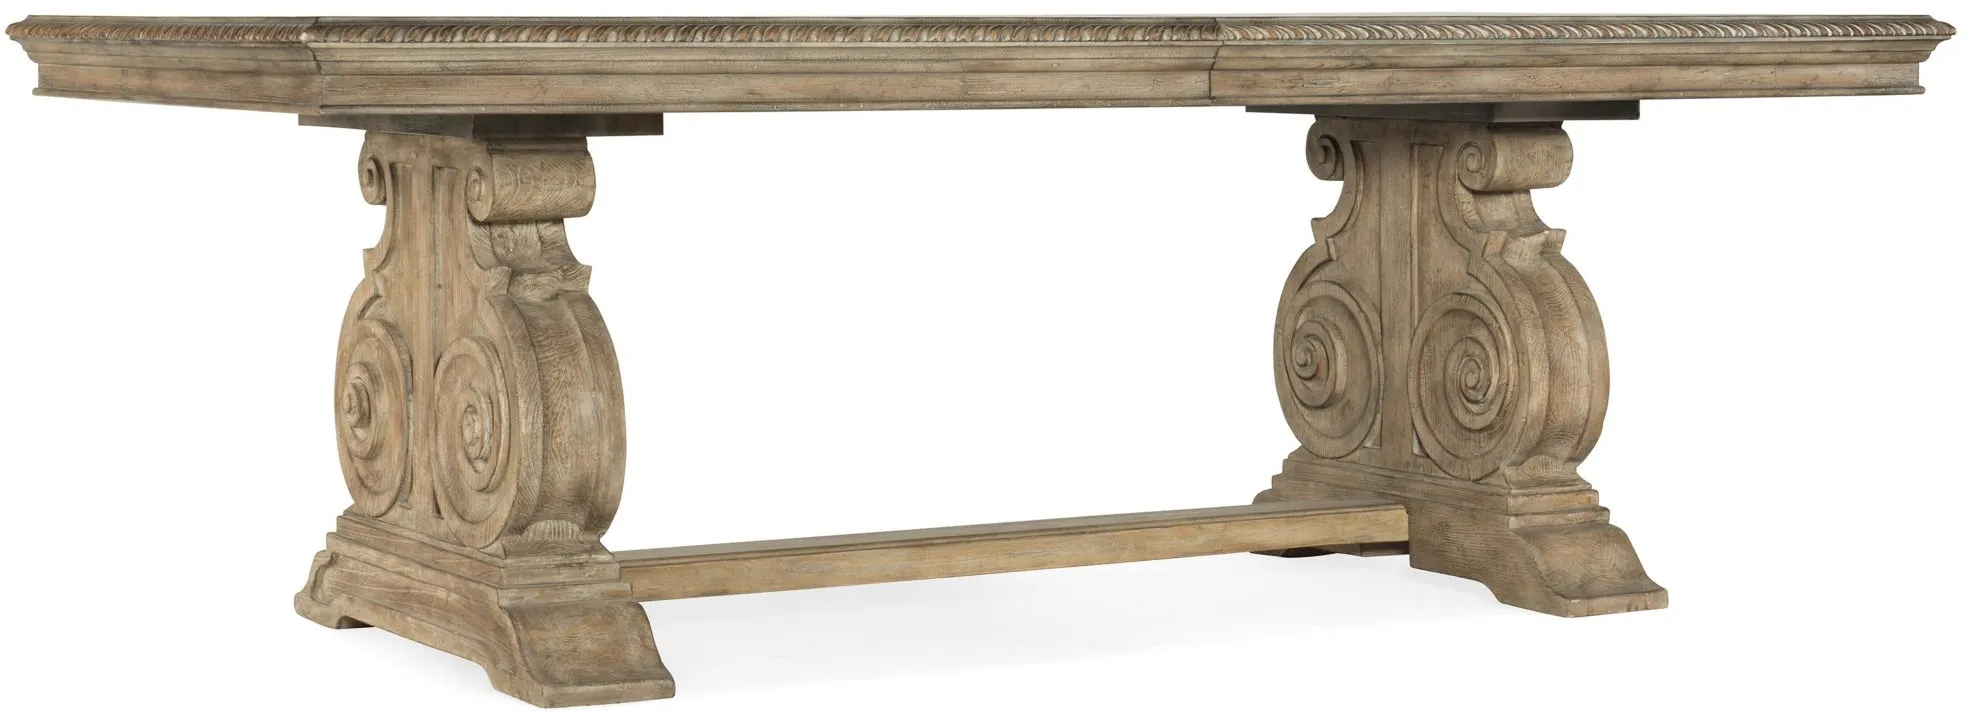 Castella Rectangular Dining Table with Two Leaves in Antique Slate by Hooker Furniture